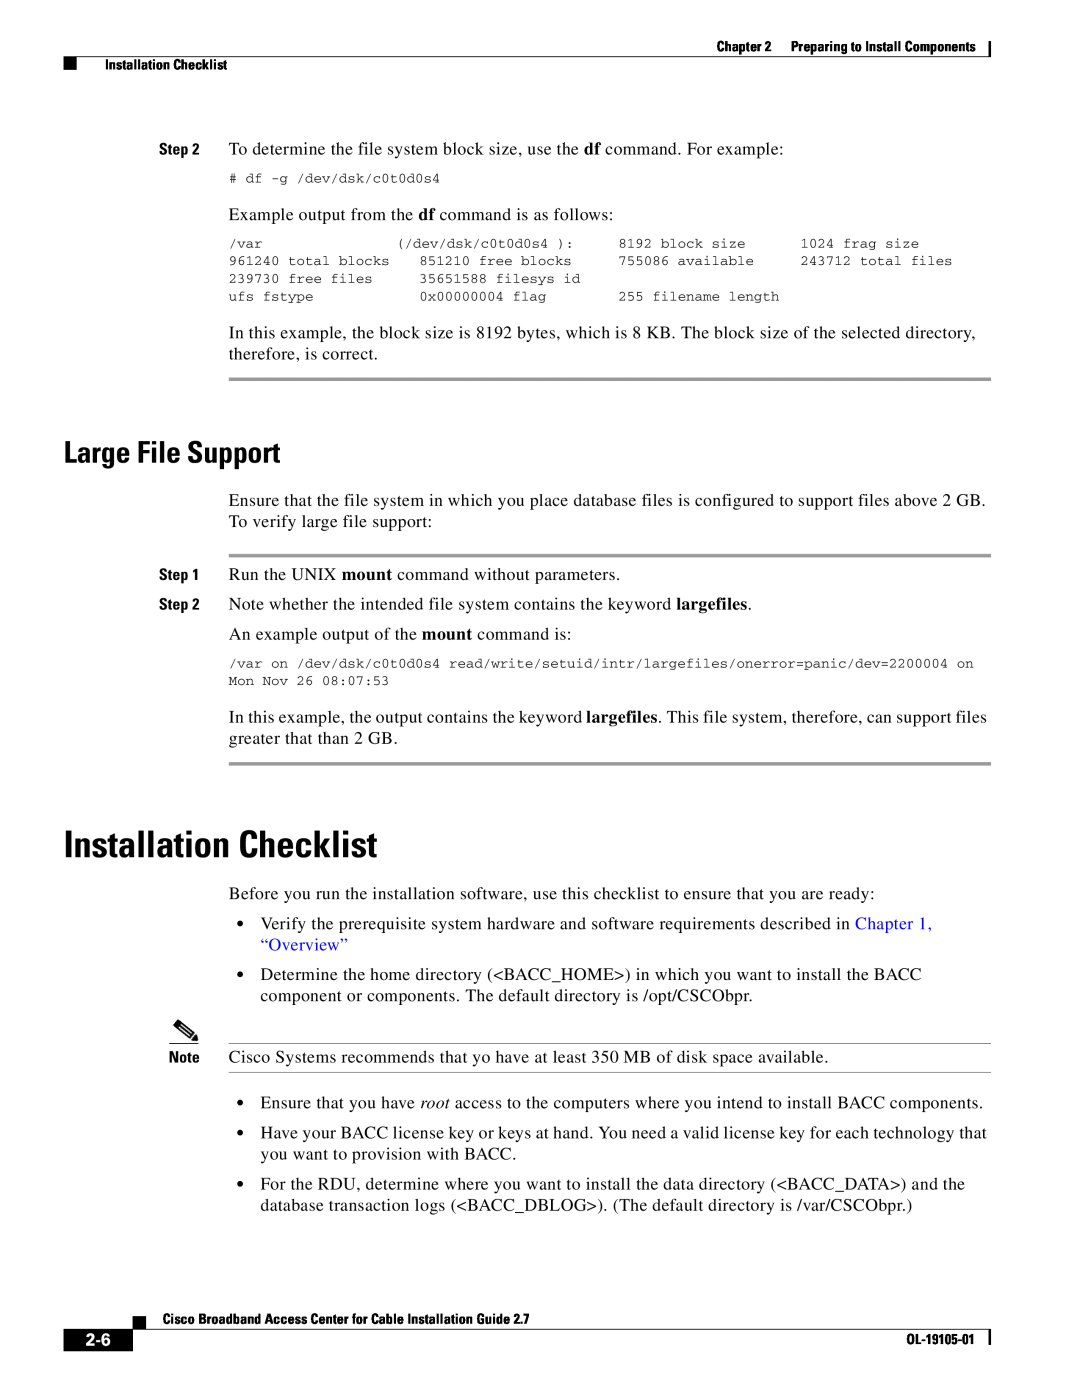 Cisco Systems Broadband Access Center manual Installation Checklist, Large File Support 